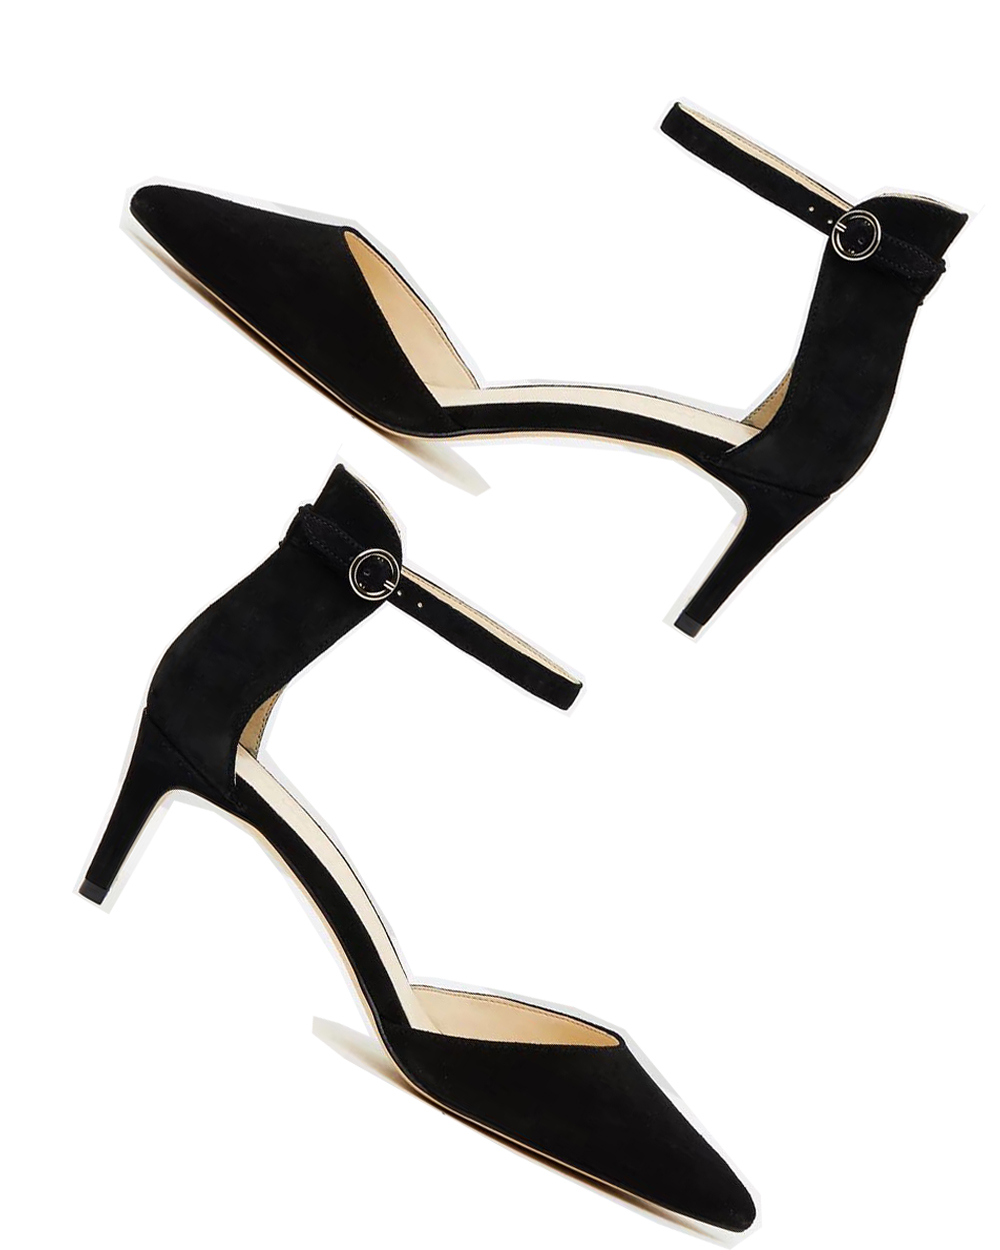 Nine West heels, $161 from The Iconic